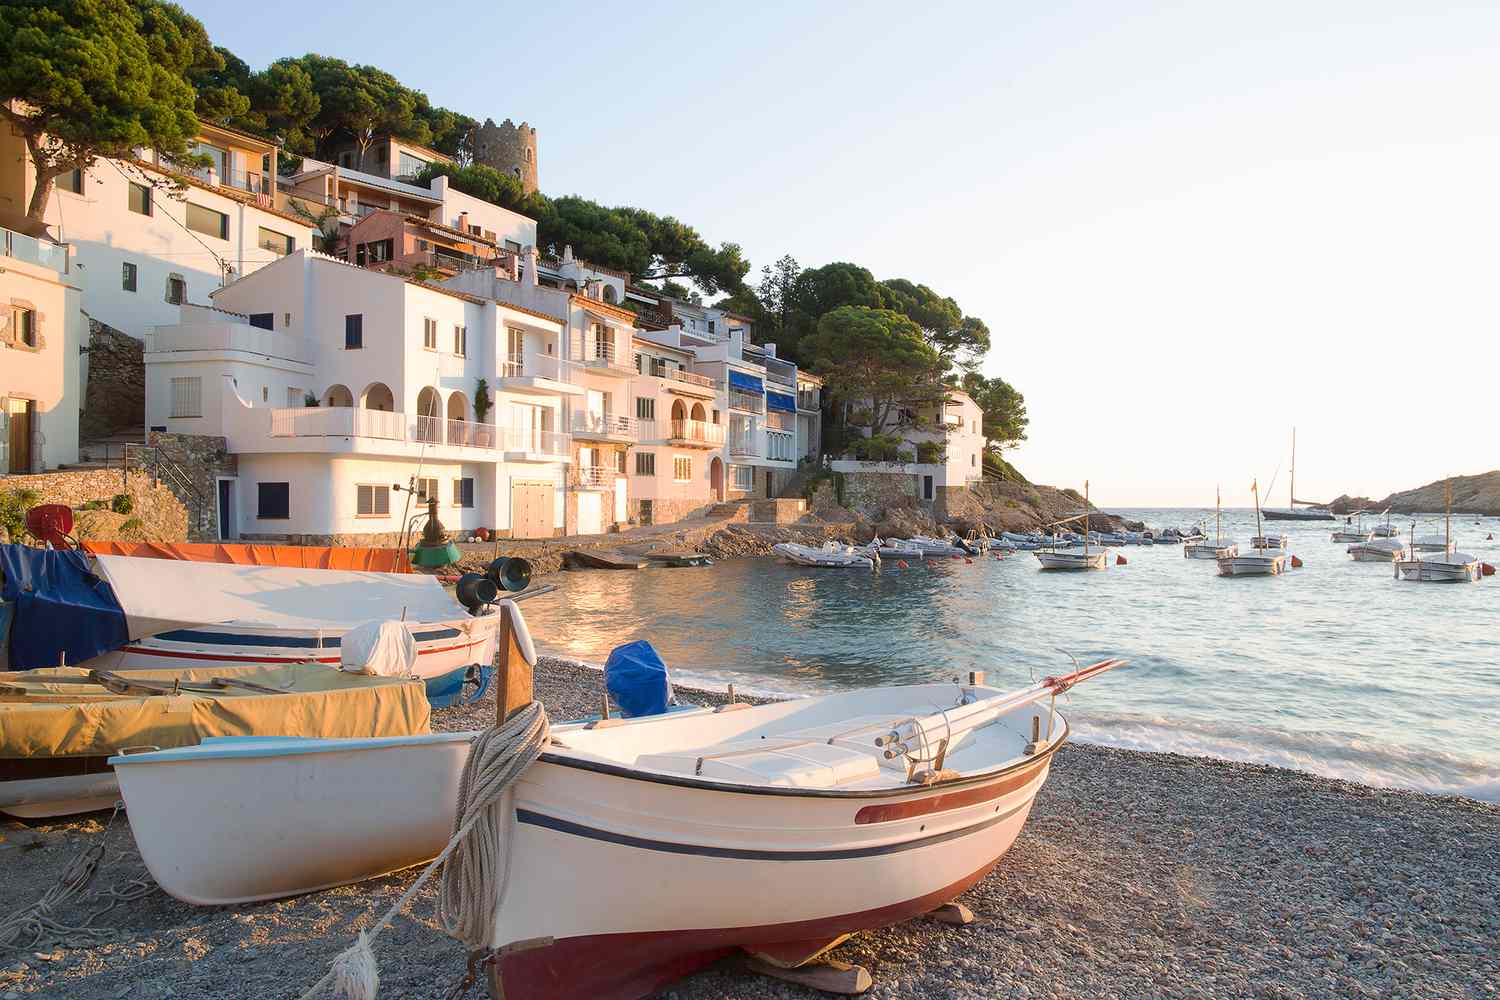 Here's Where You Should Travel This Summer, Based on Your Zodiac Sign